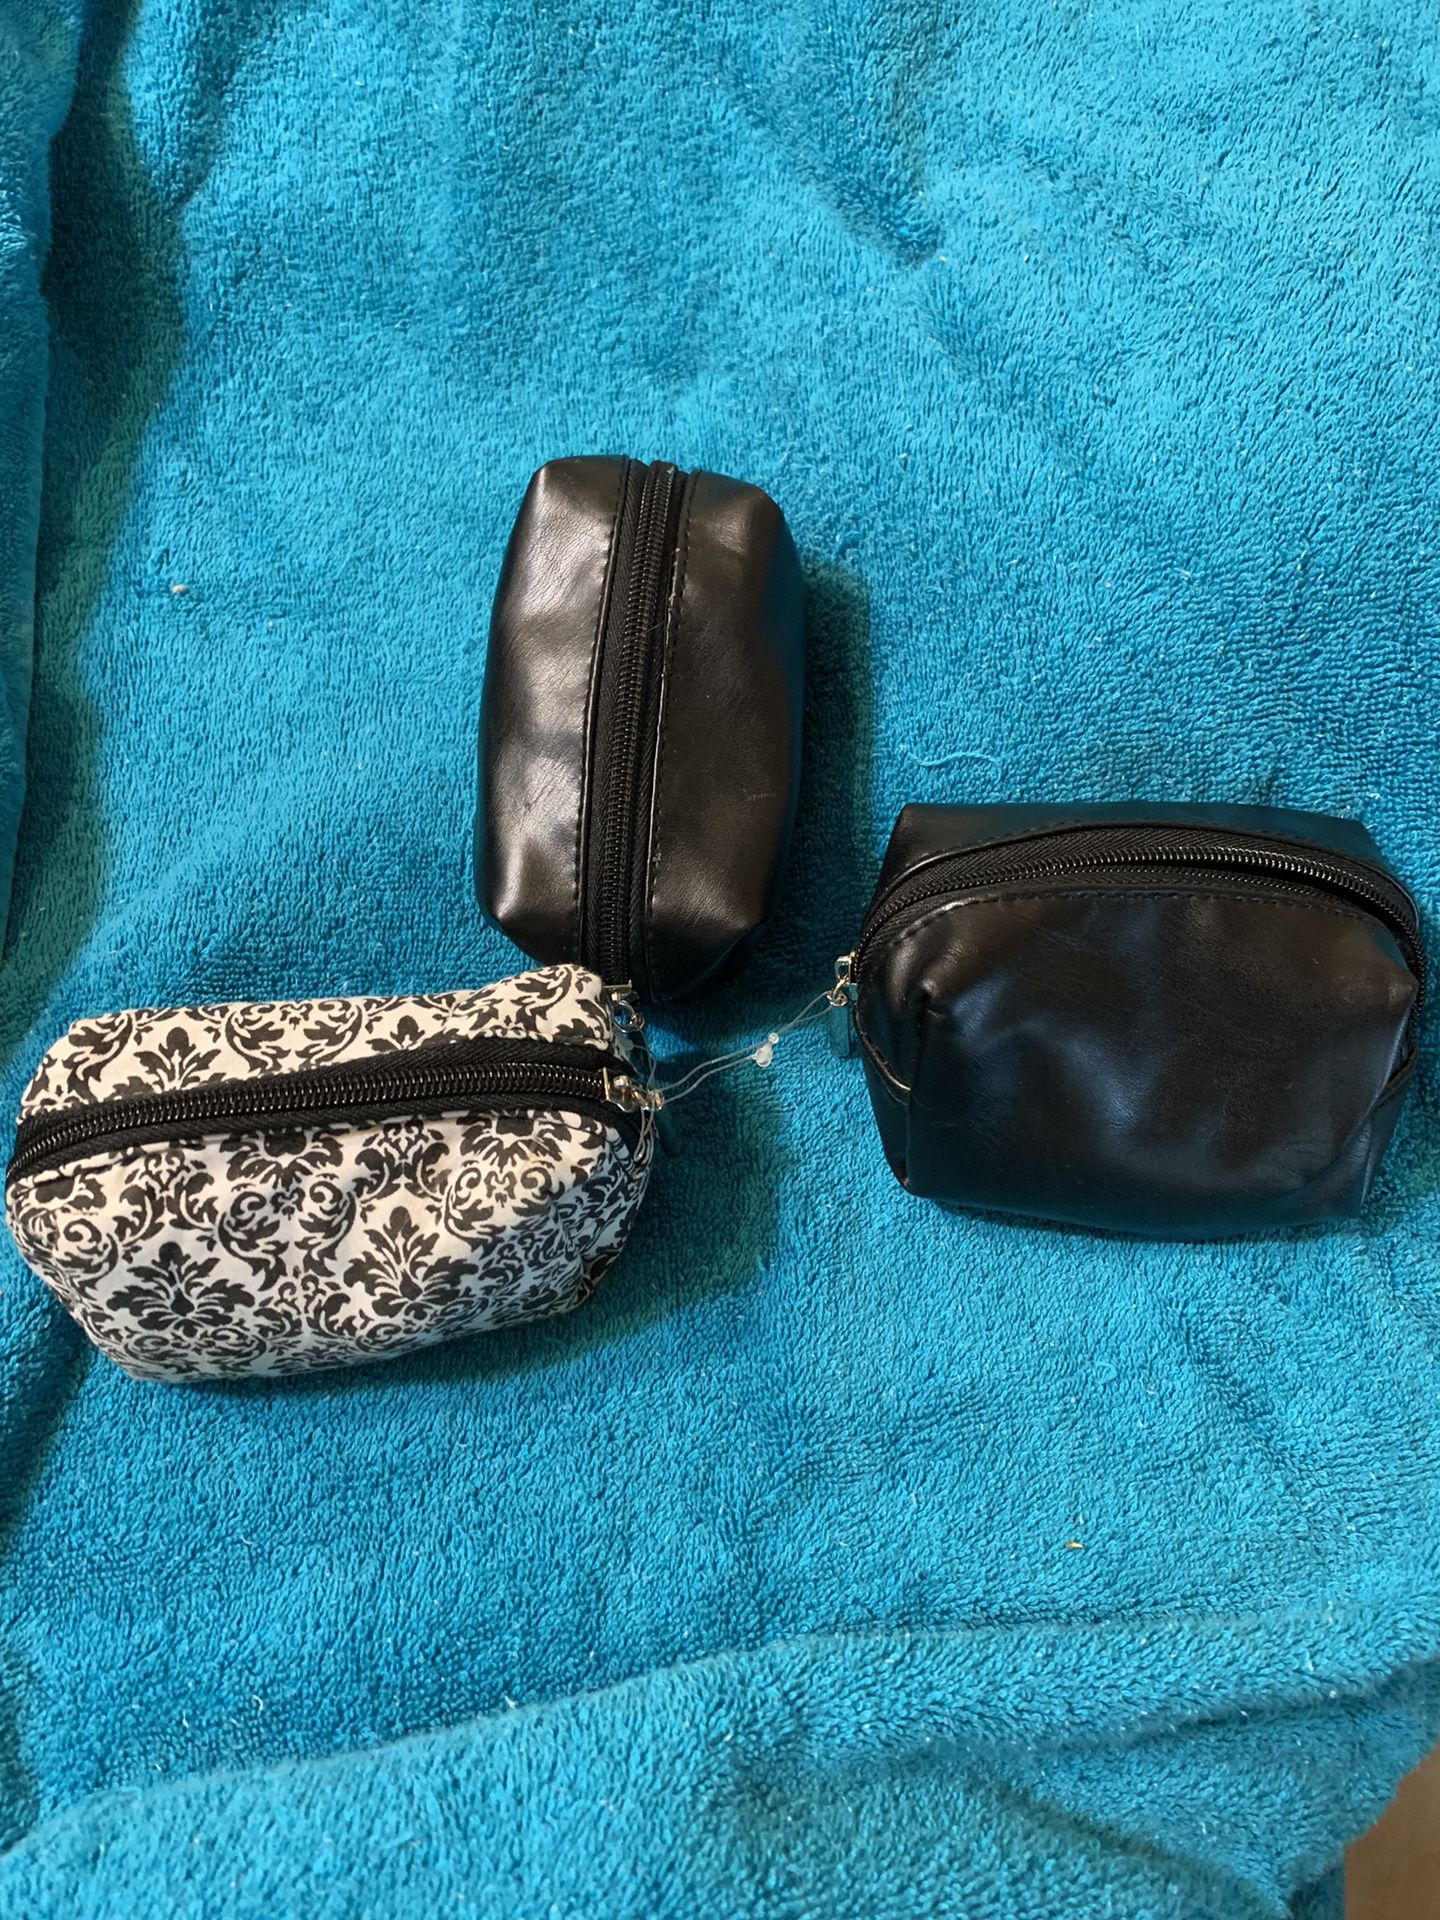 3 small makeup bags or change purses